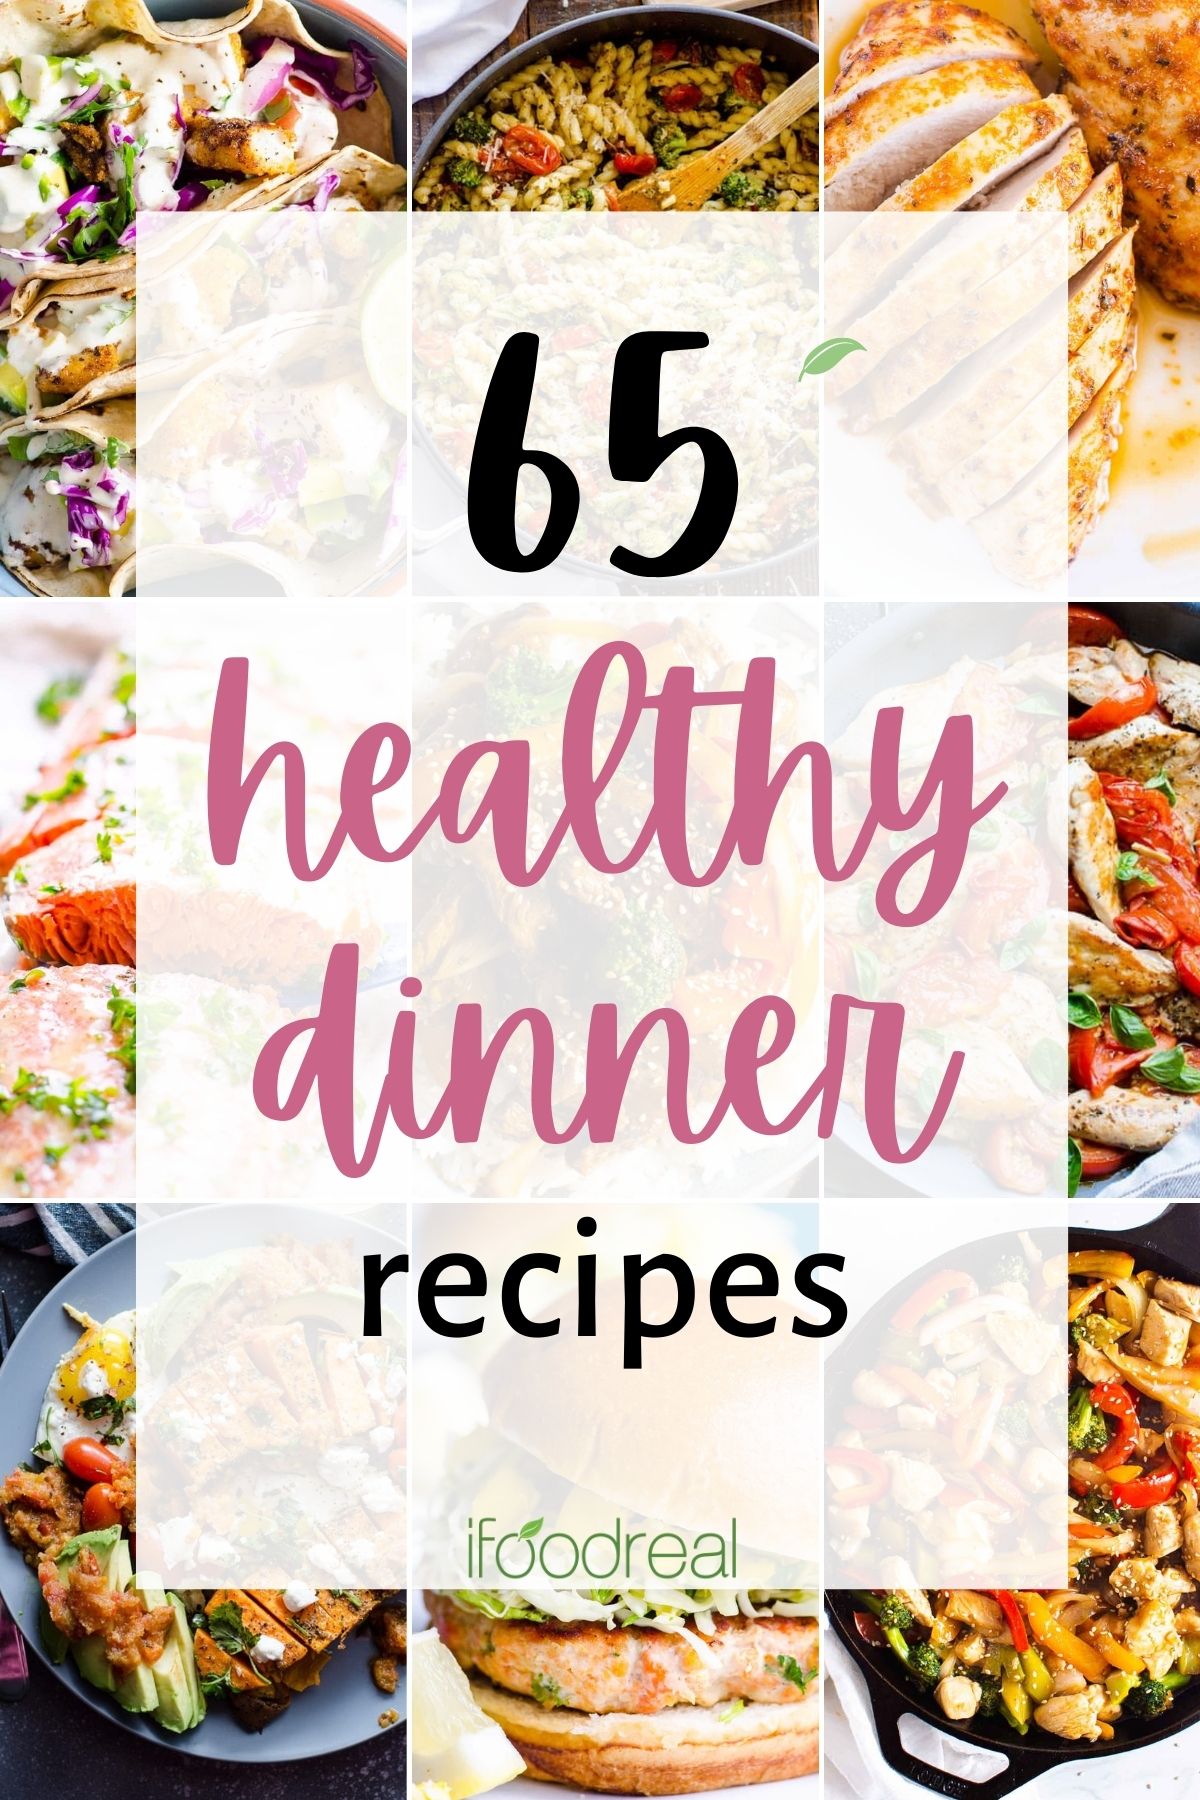 Healthy dinner ideas photo collage.